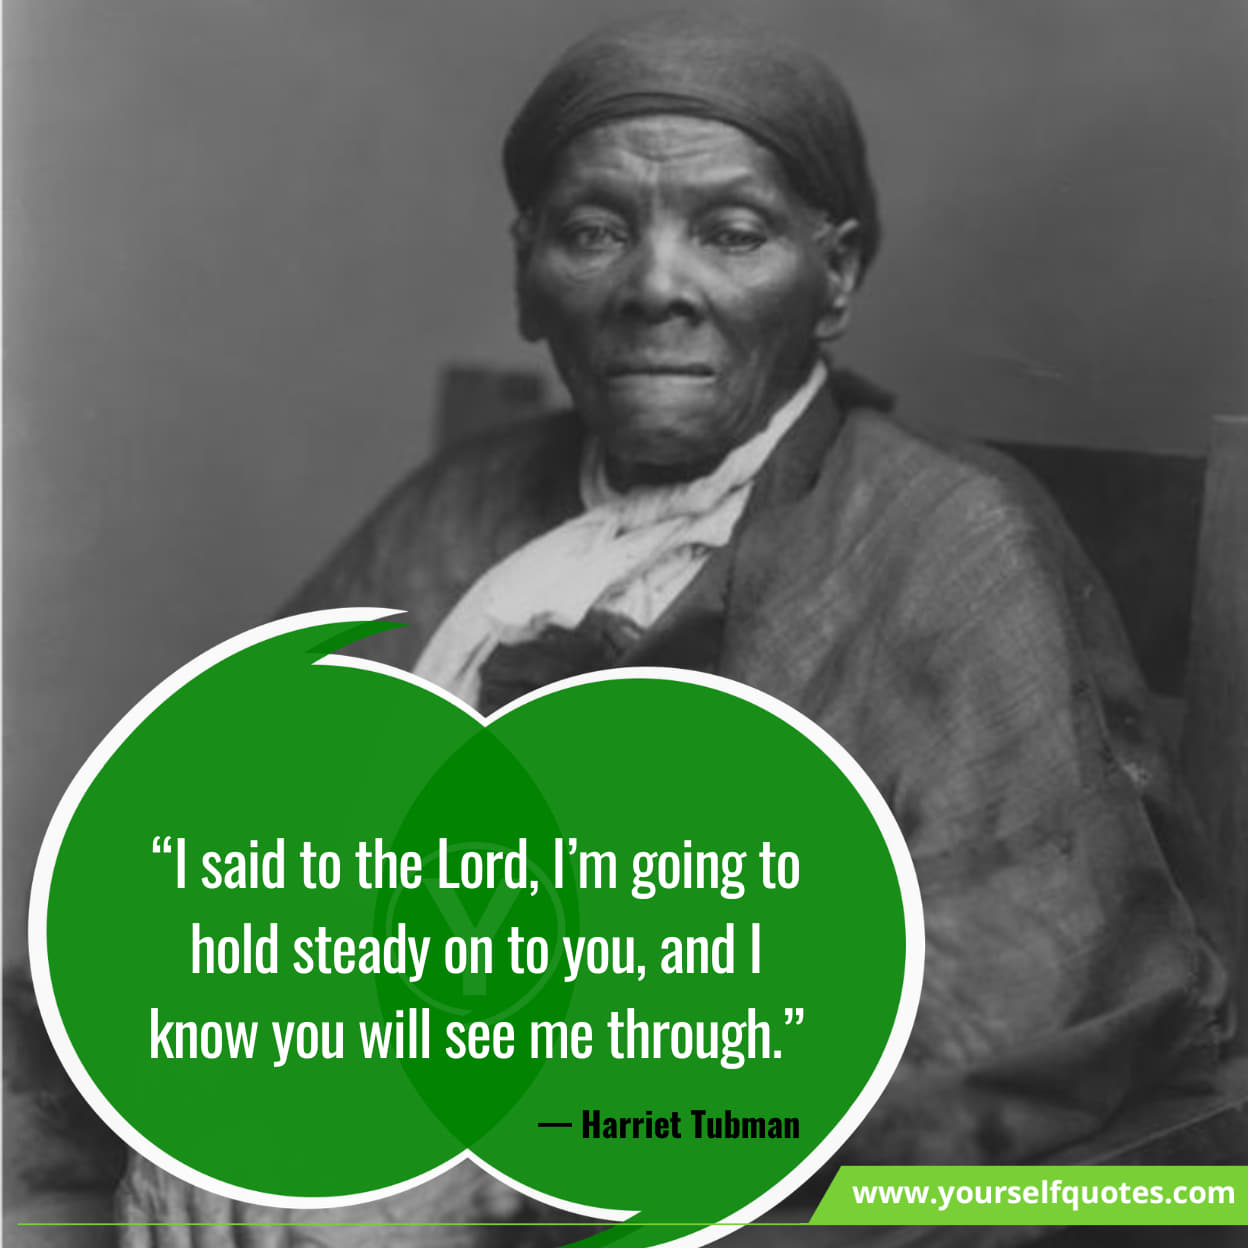 Harriet Tubman quotes on perseverance and strength